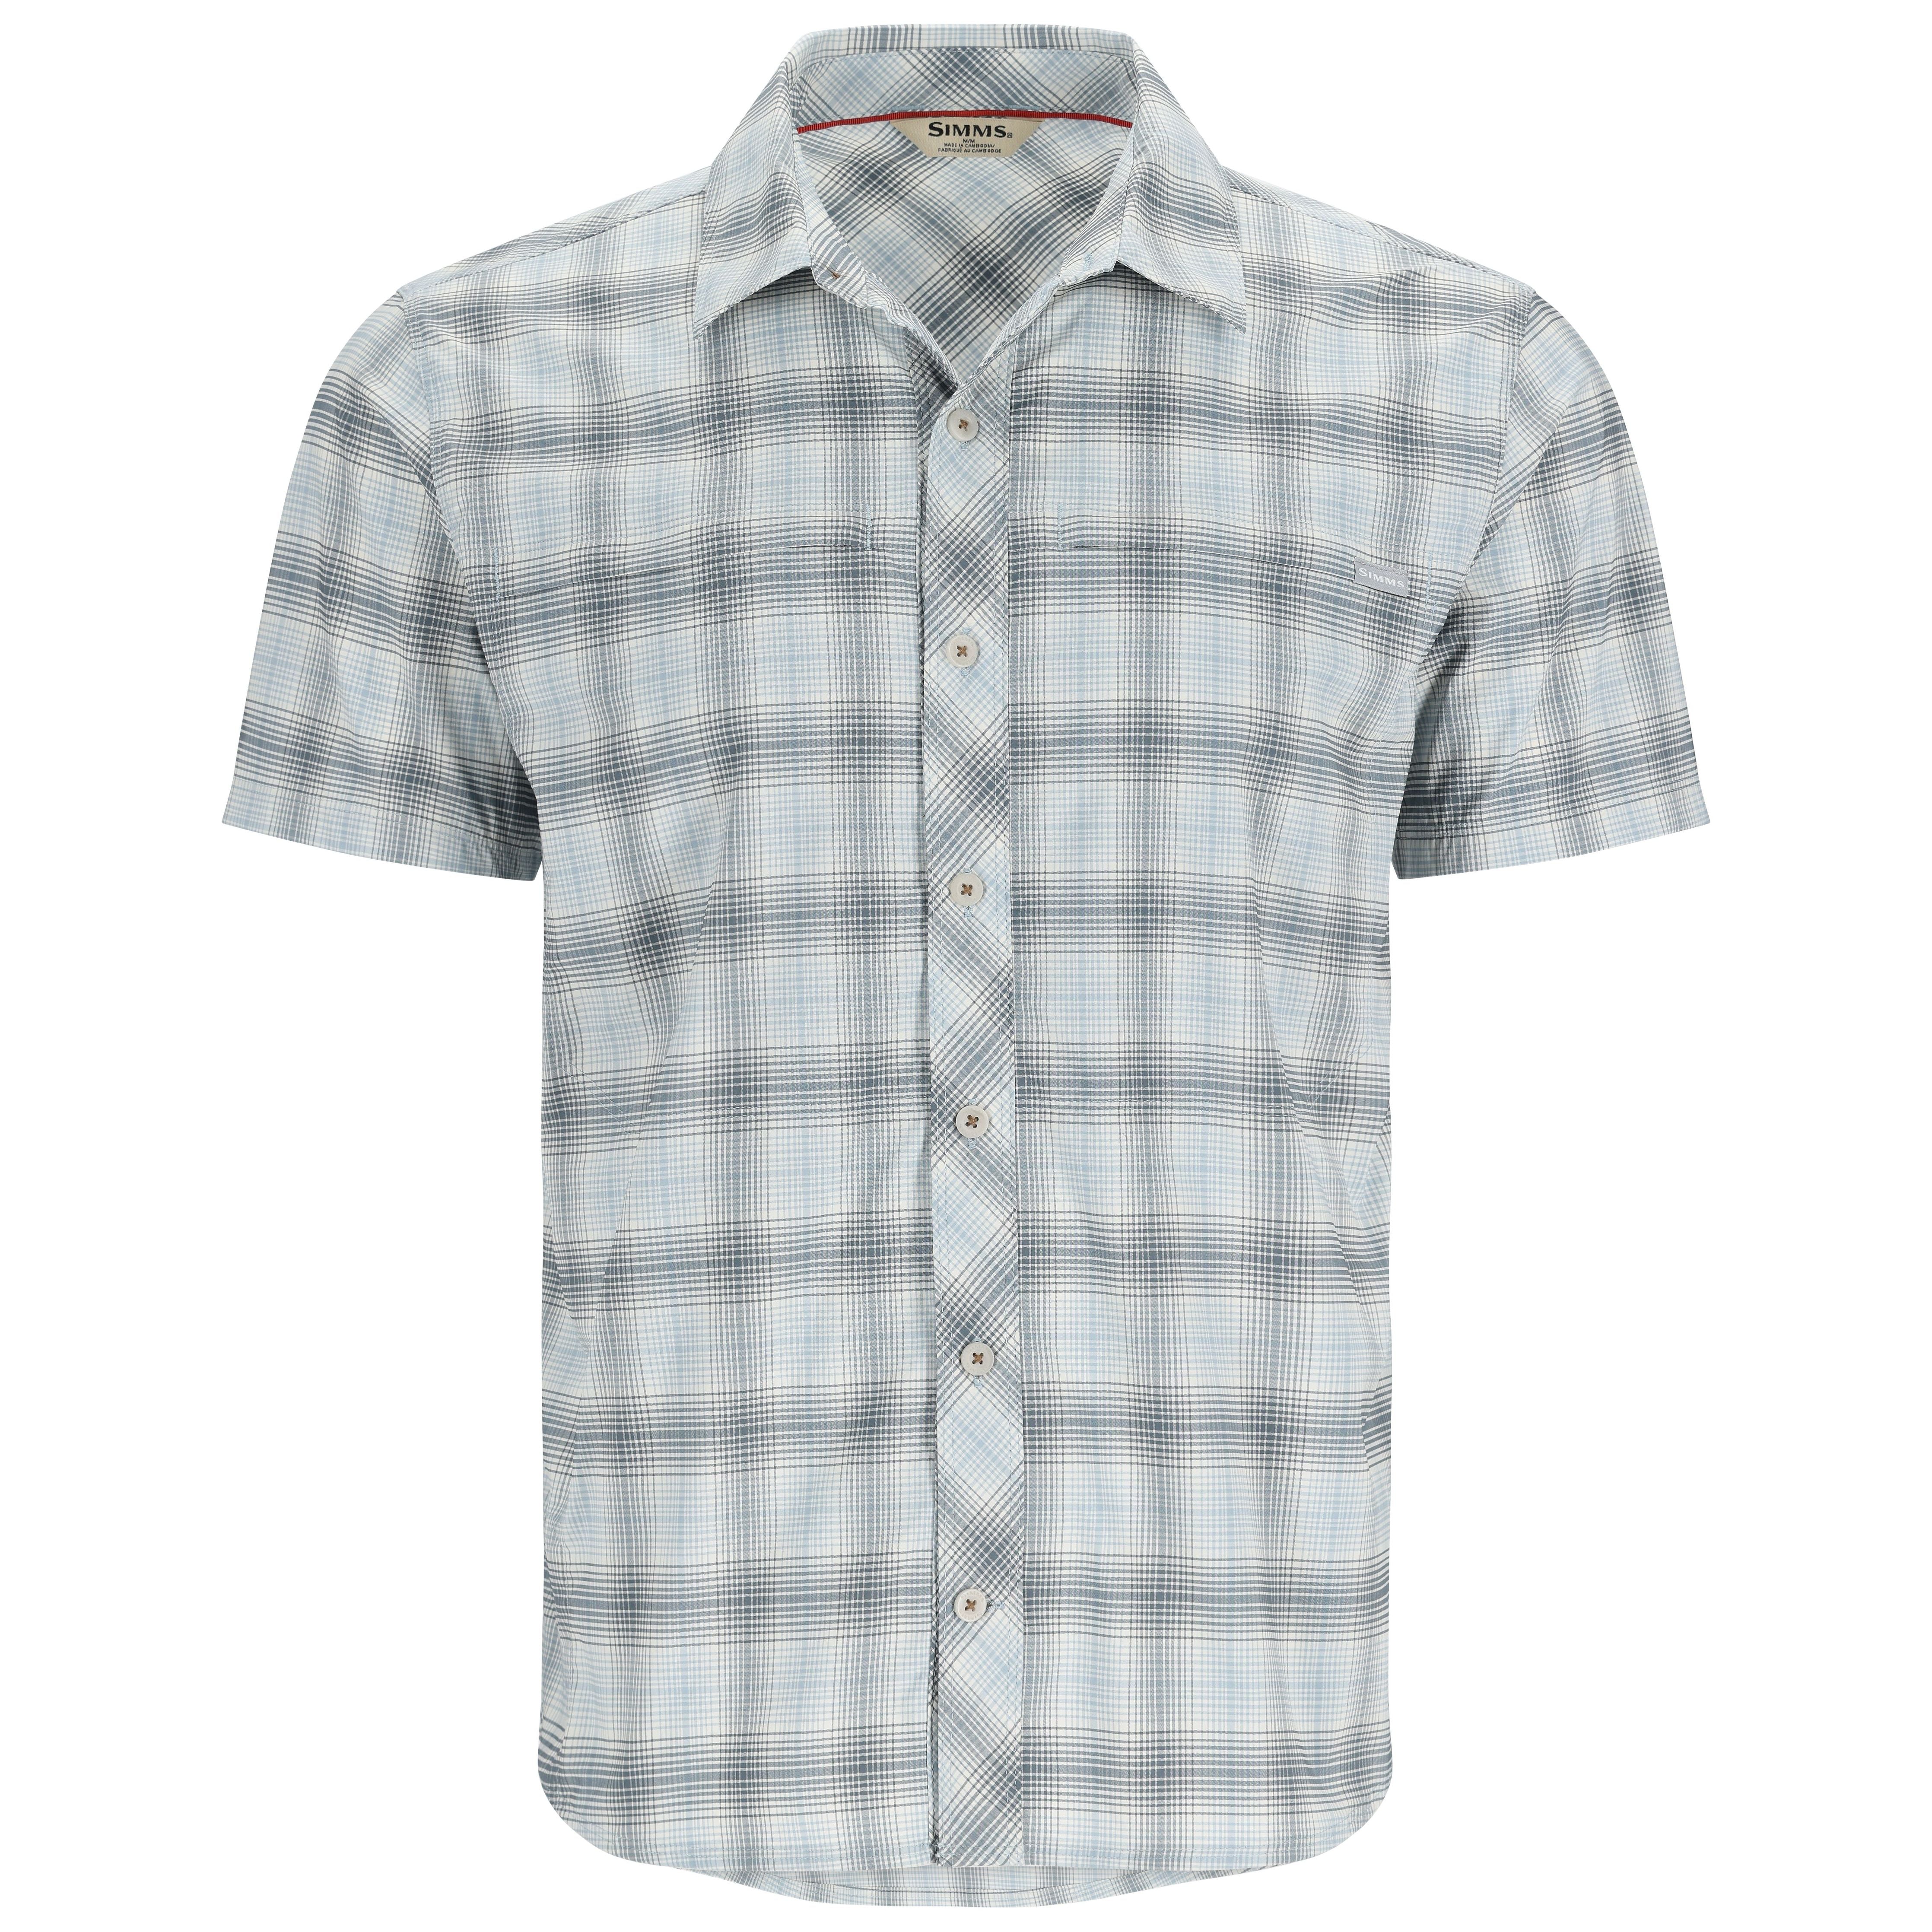 Simms Stone Cold SS Shirt Steel Blue/Storm Ombre Plaid Image 01